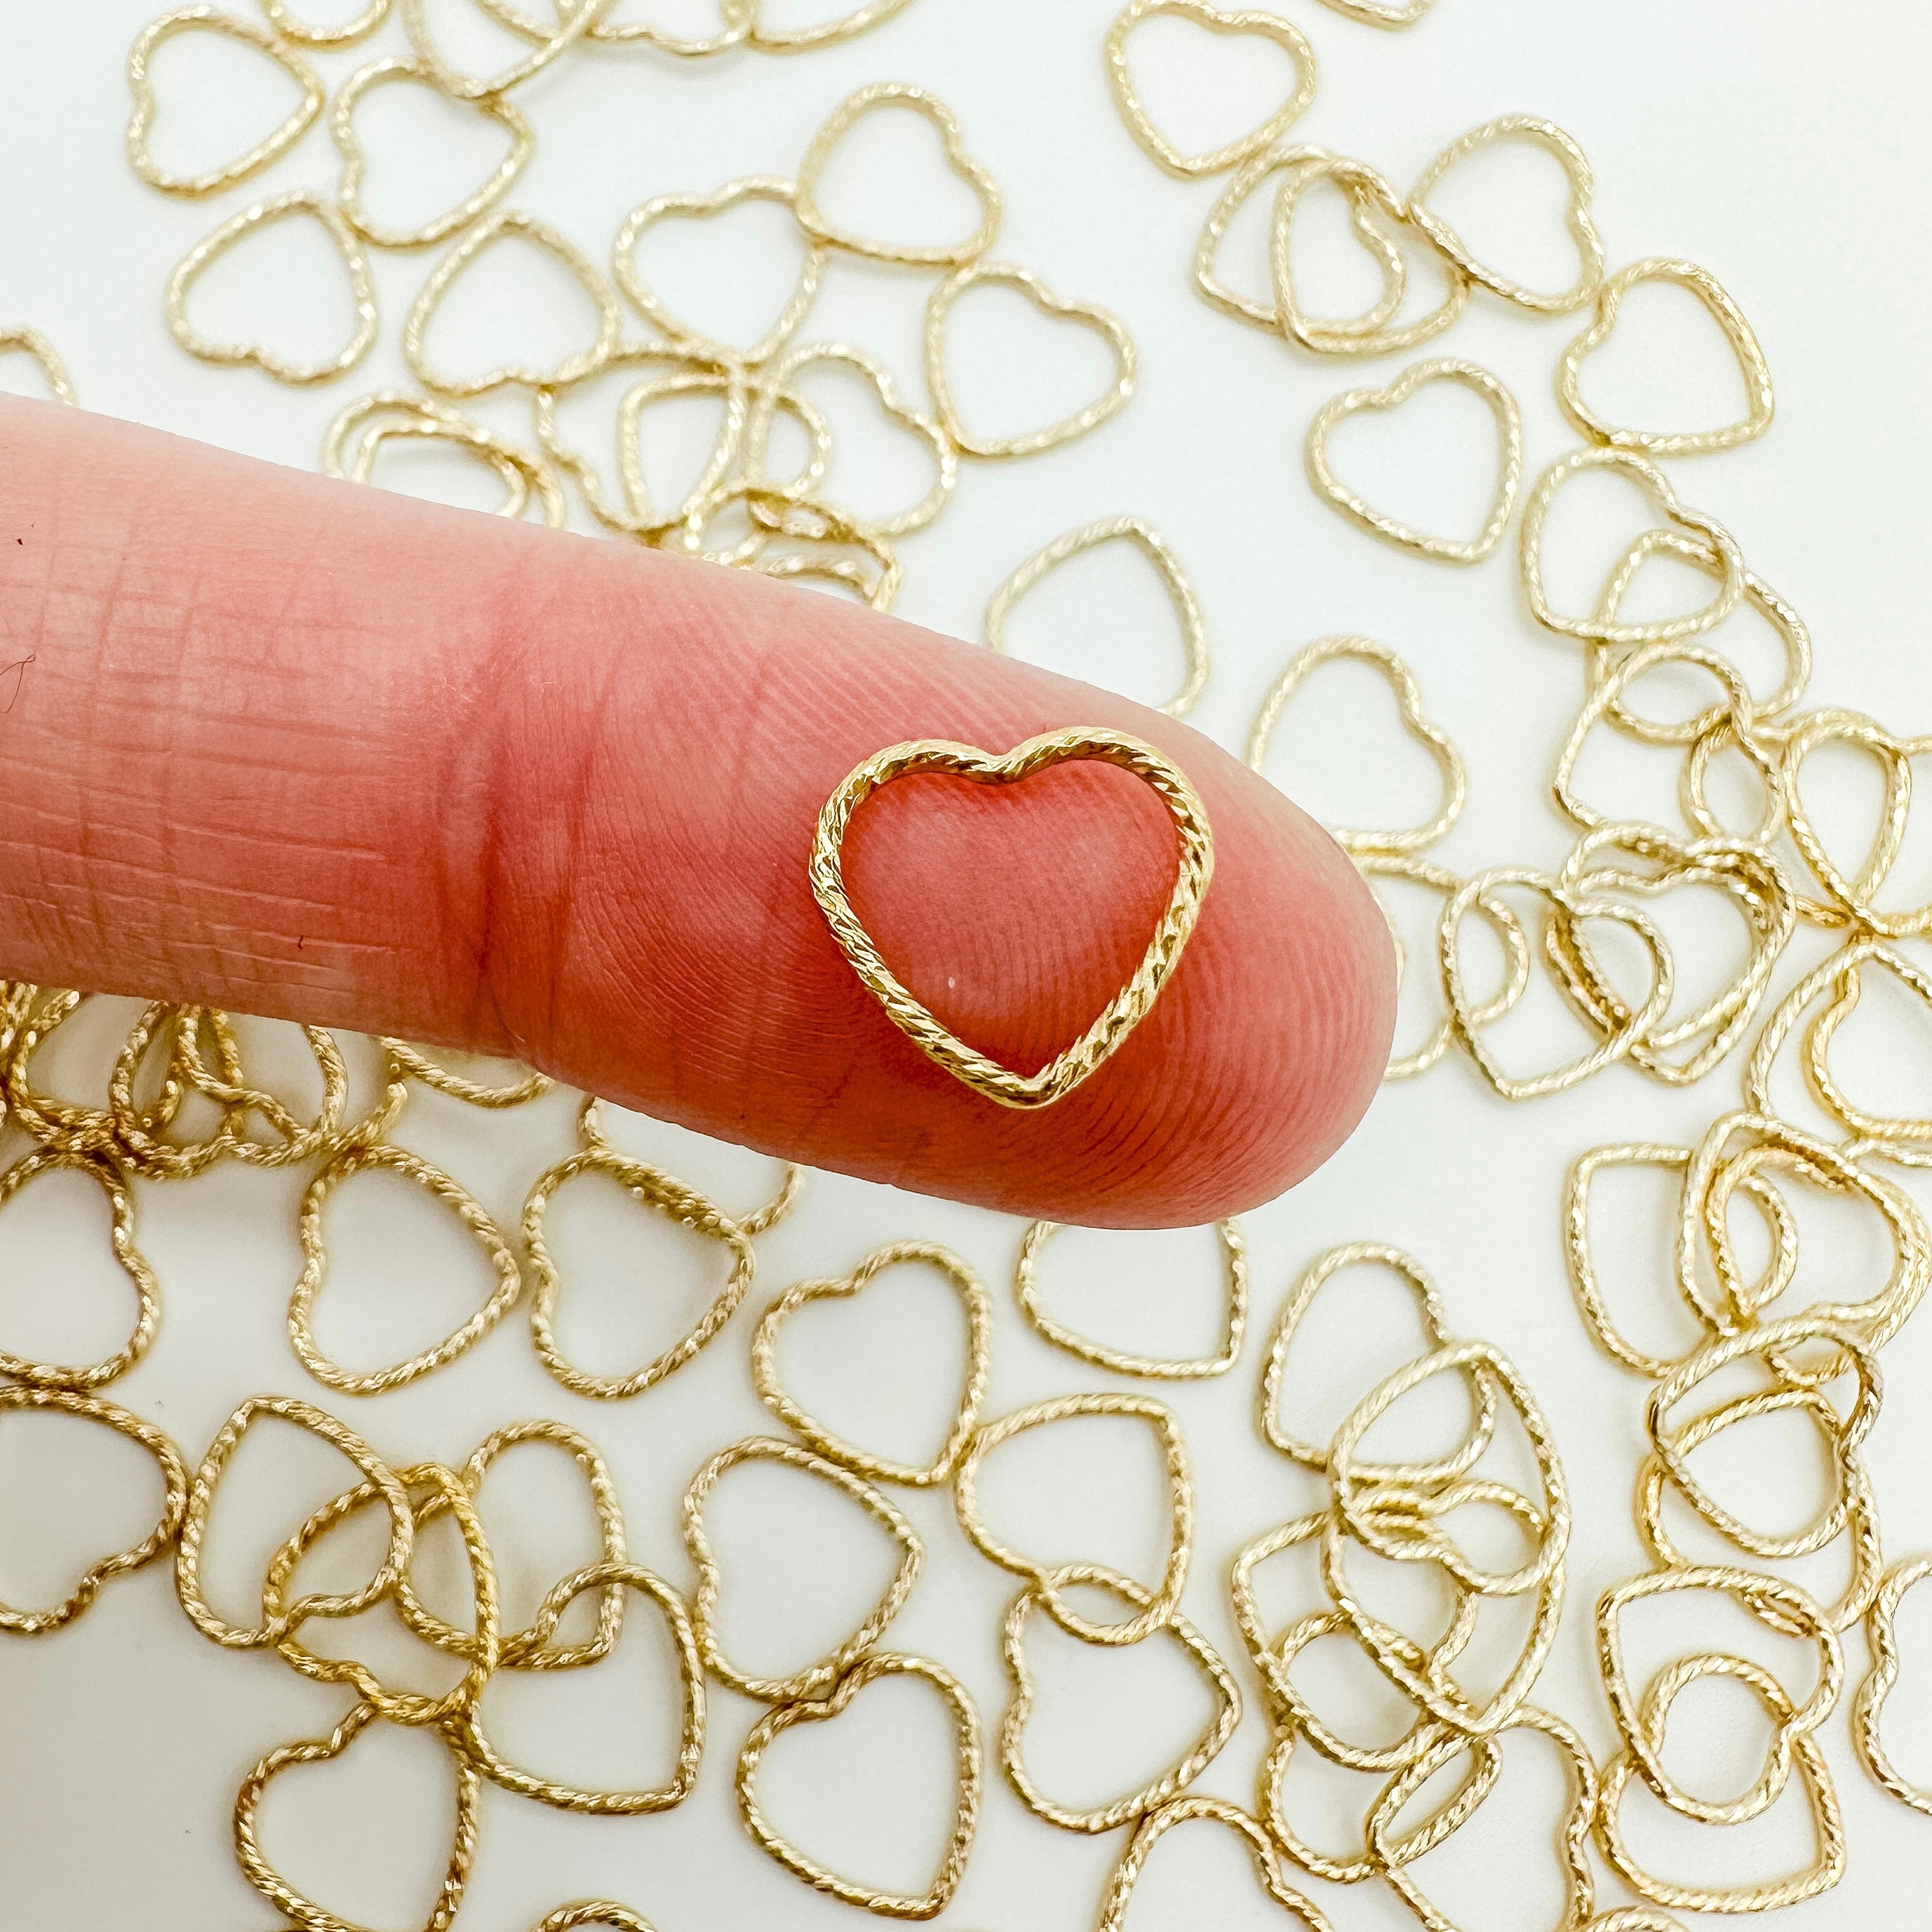 textured heart connector / permanent jewelry supplier / permanent jewelry supplies / gold filled connector / permanent jewelry connector / gold filled heart charm / heart connector